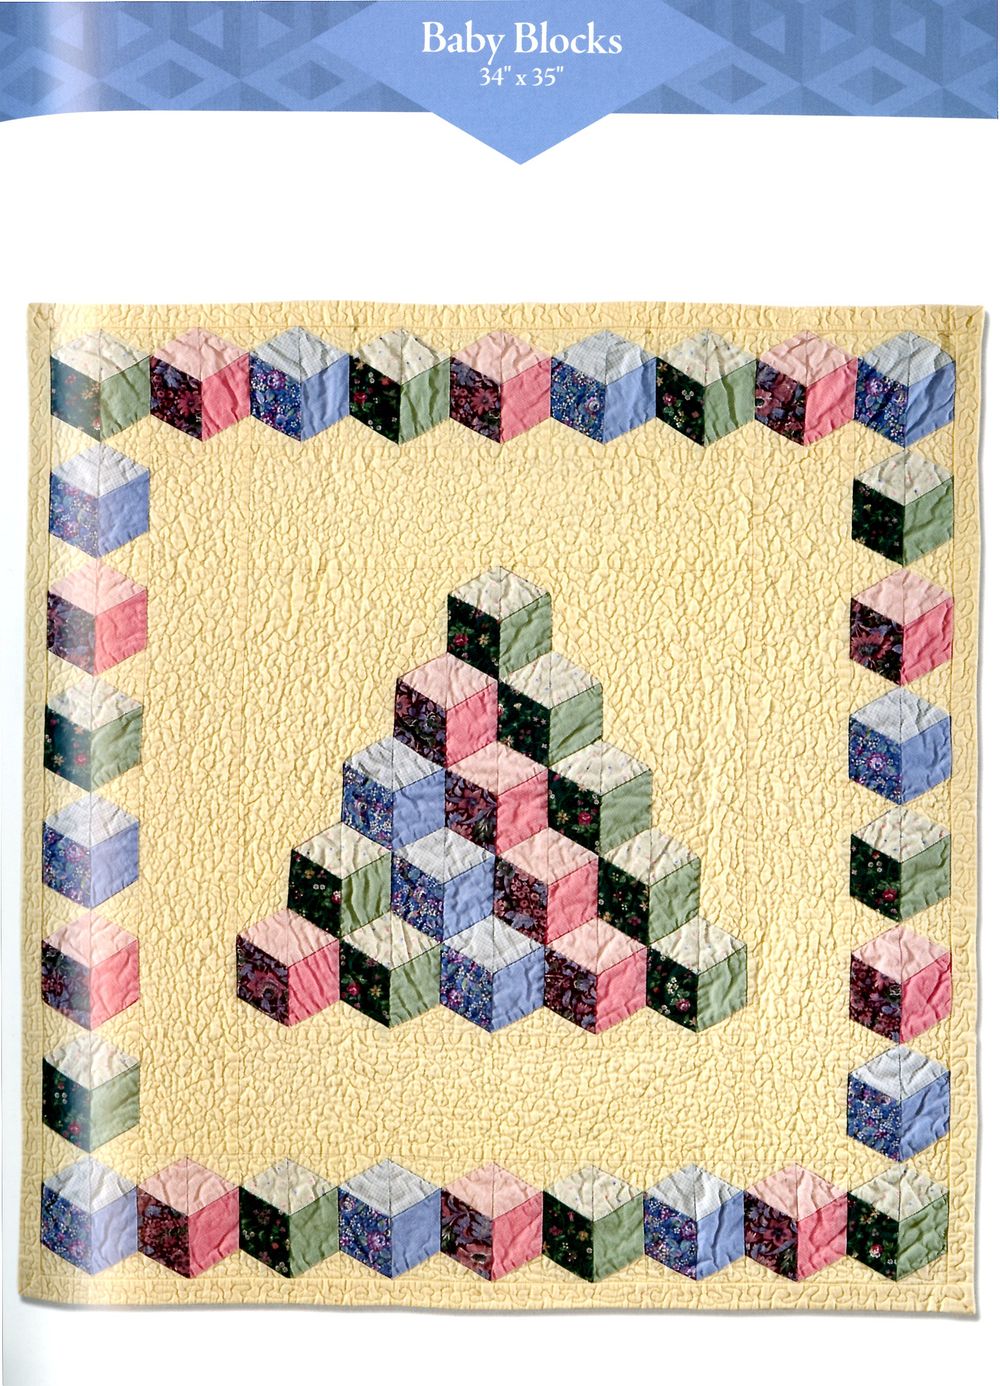 Abc 3-D Tumbling Blocks and More Quilt Pattern Book by Marci Baker for C&T Publishing